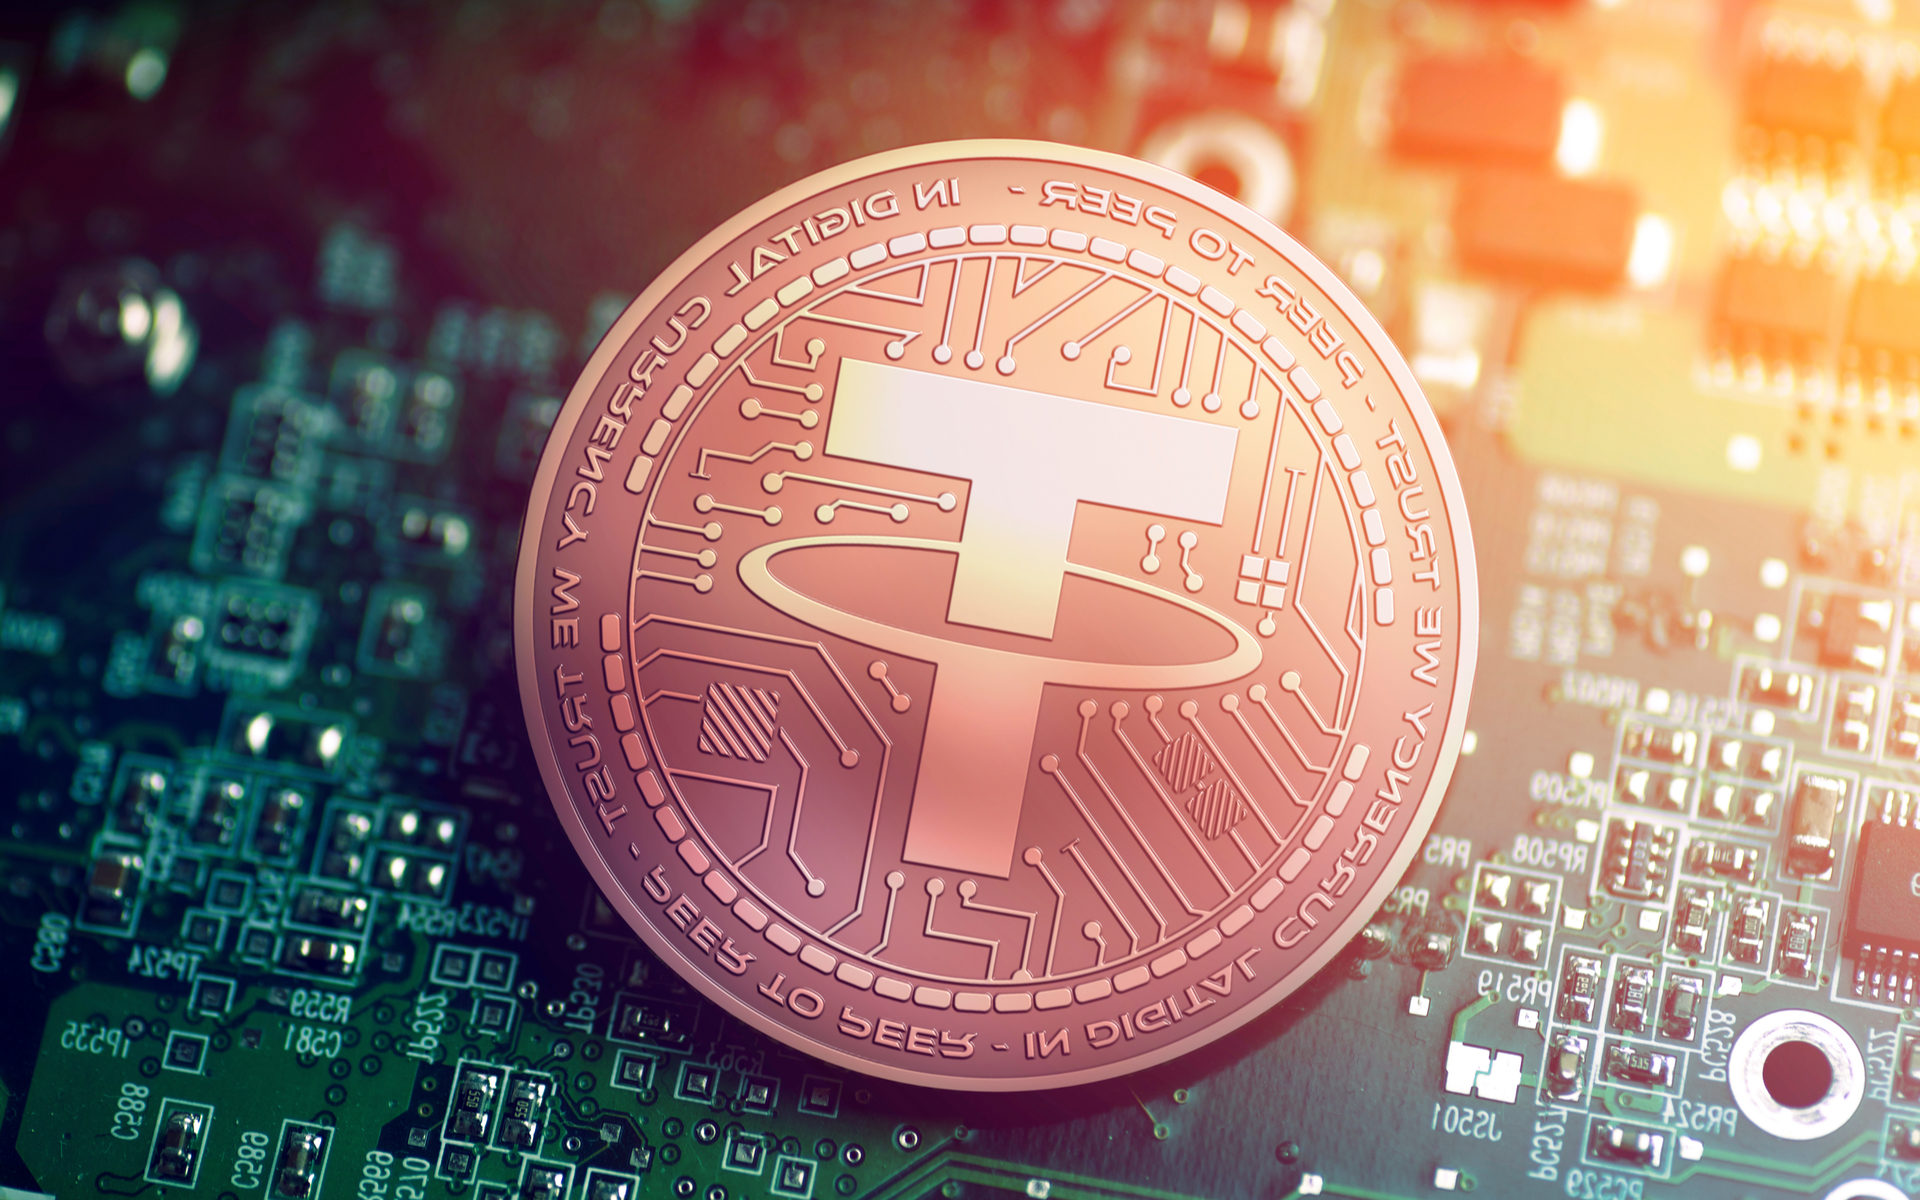 Tether is pumping bitcoin price